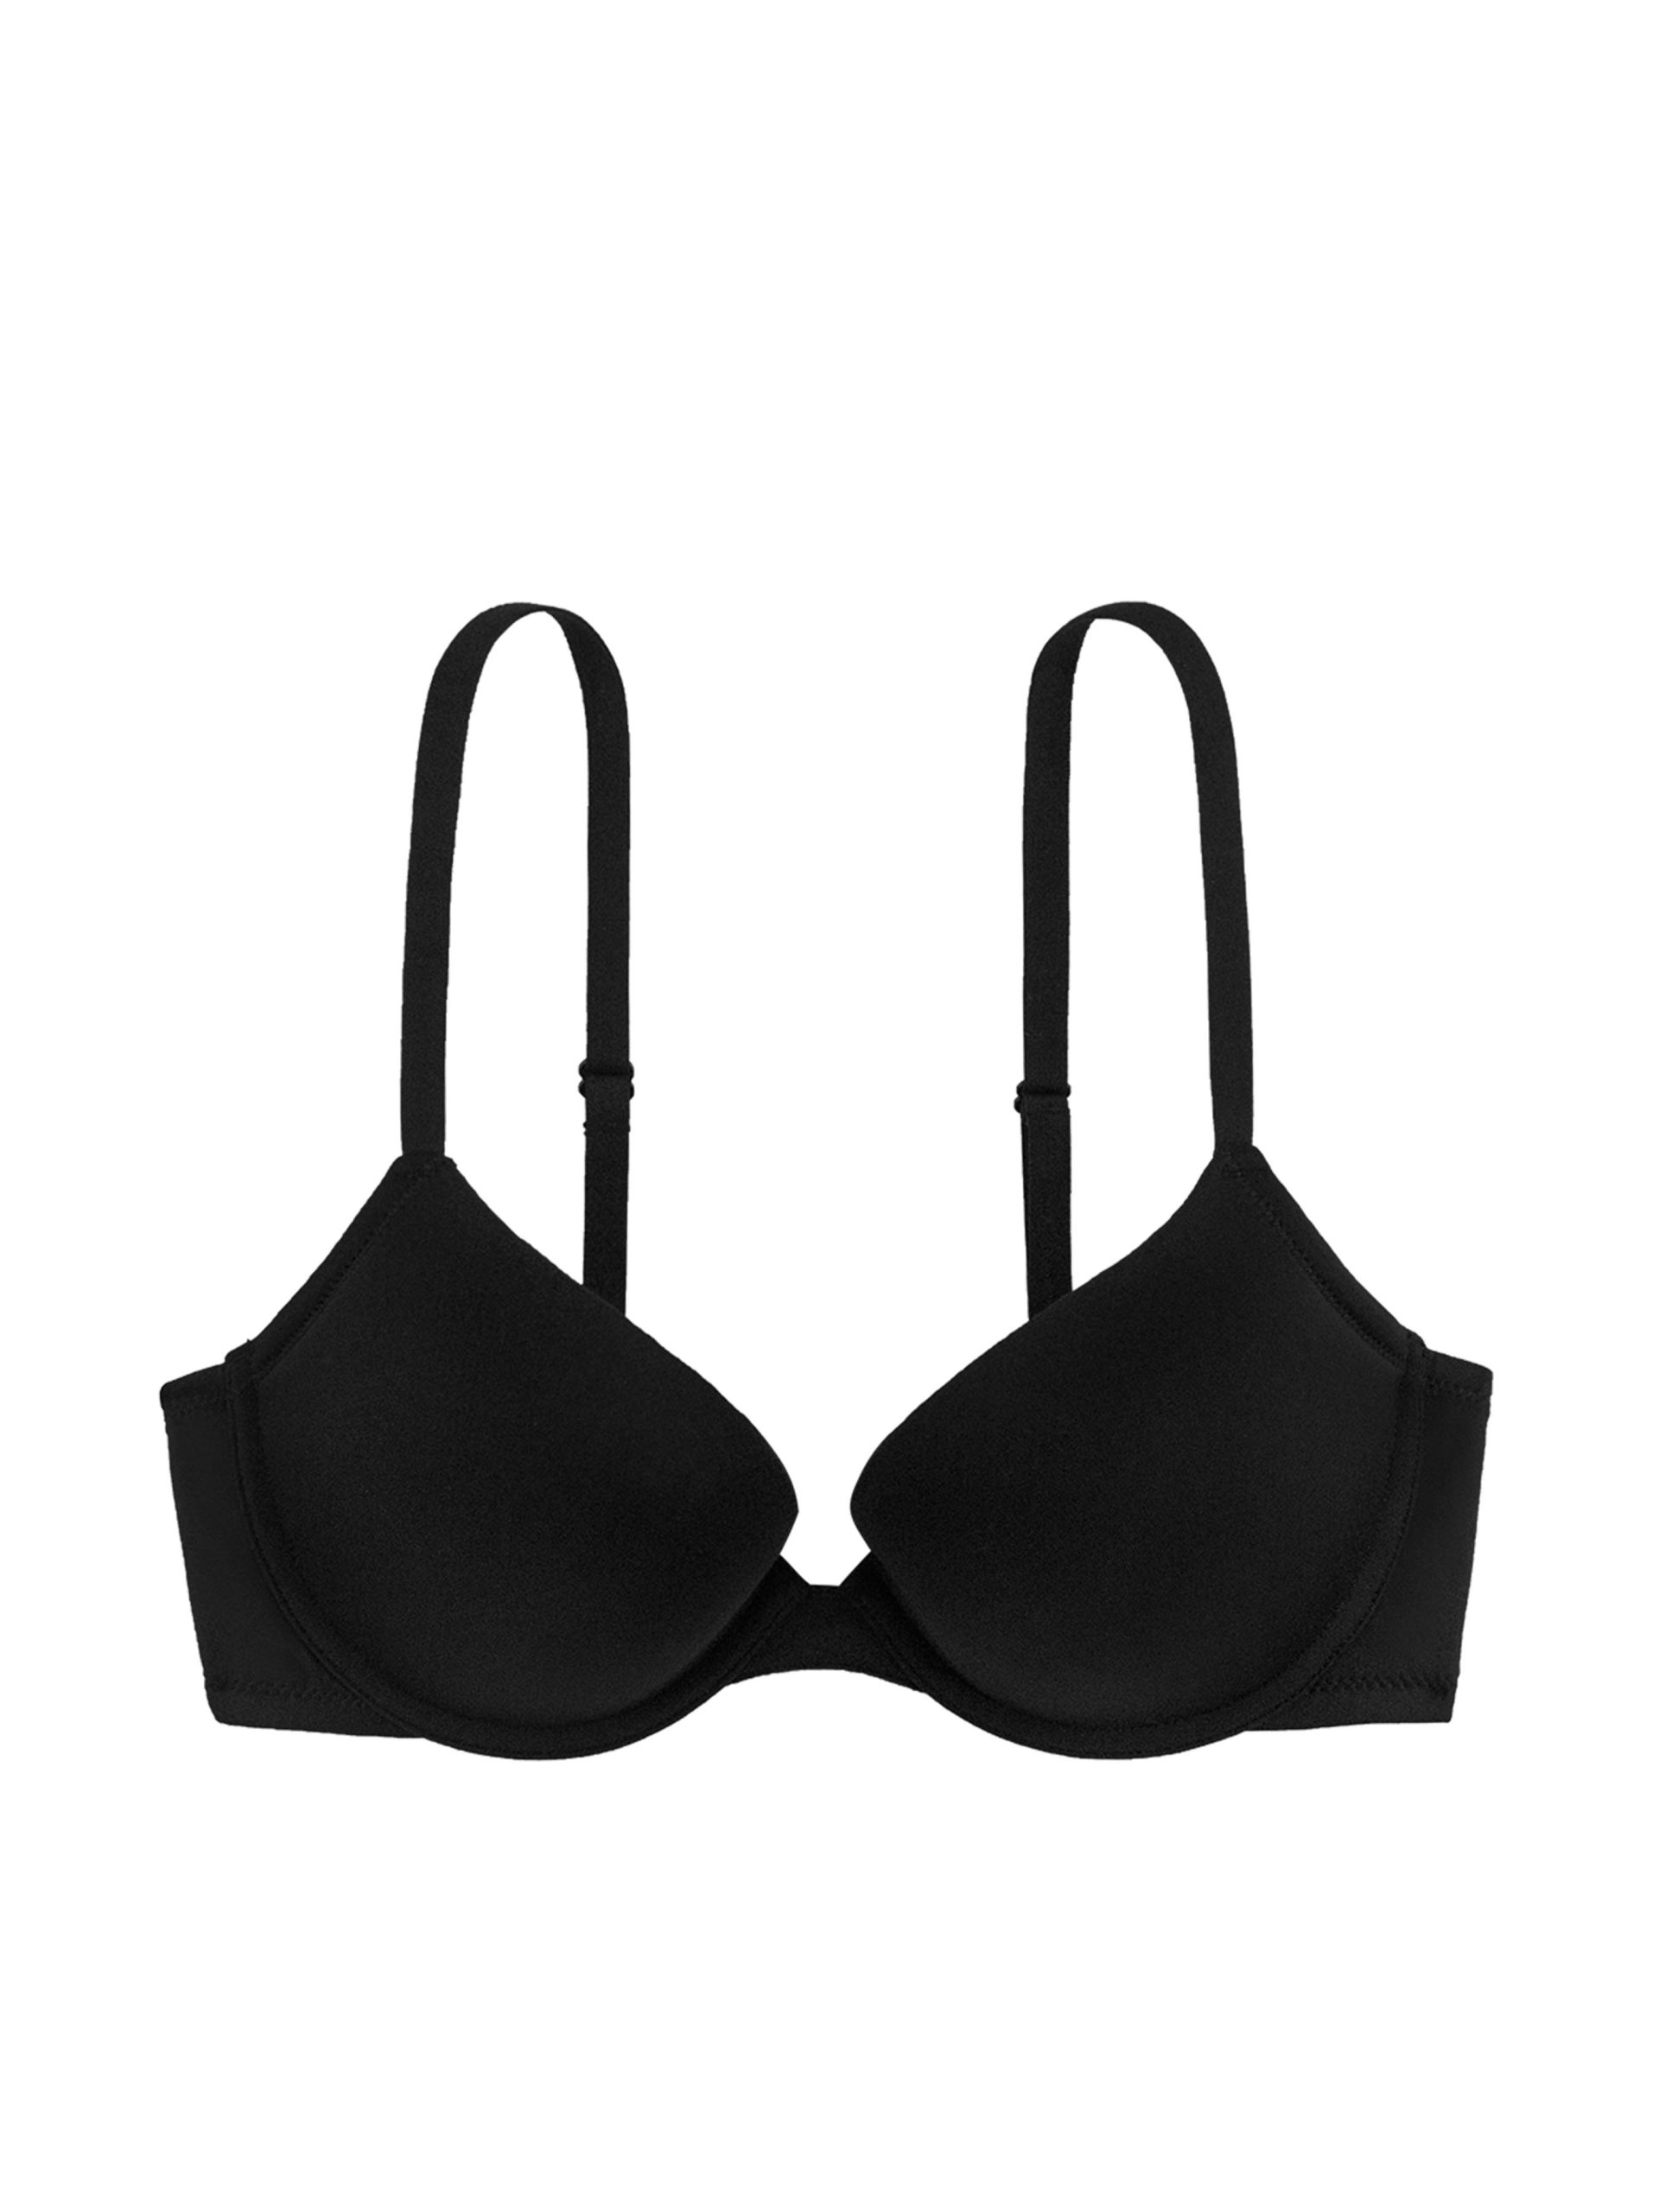 The CARMEN/ECO bra is made from DORINA - Storm in A-G Cup